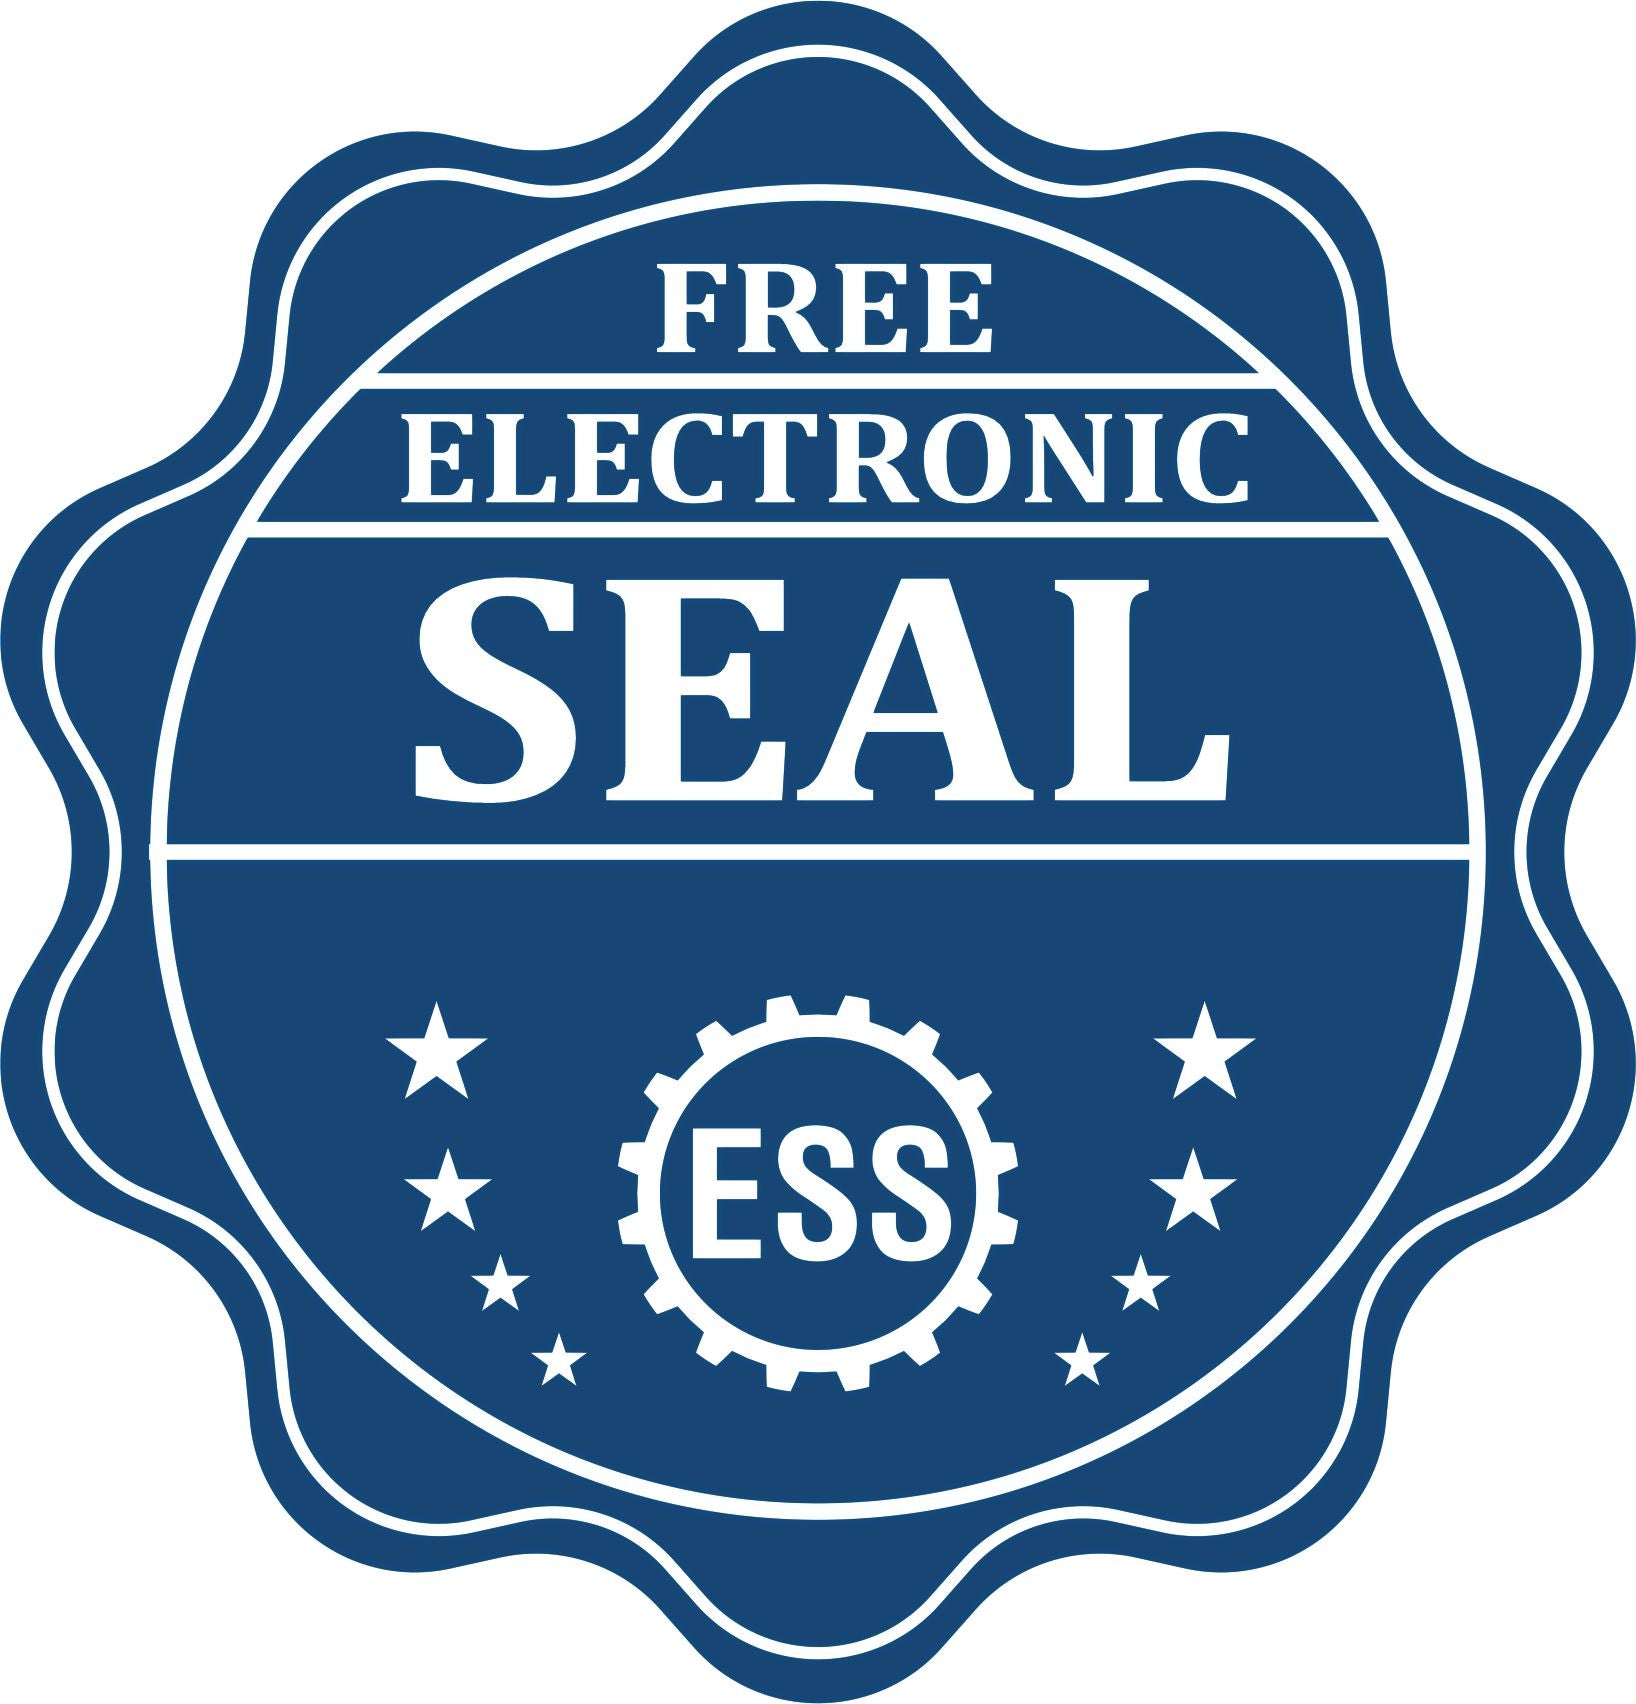 A badge showing a free electronic seal for the Gift Pennsylvania Land Surveyor Seal with stars and the ESS gear on the emblem.